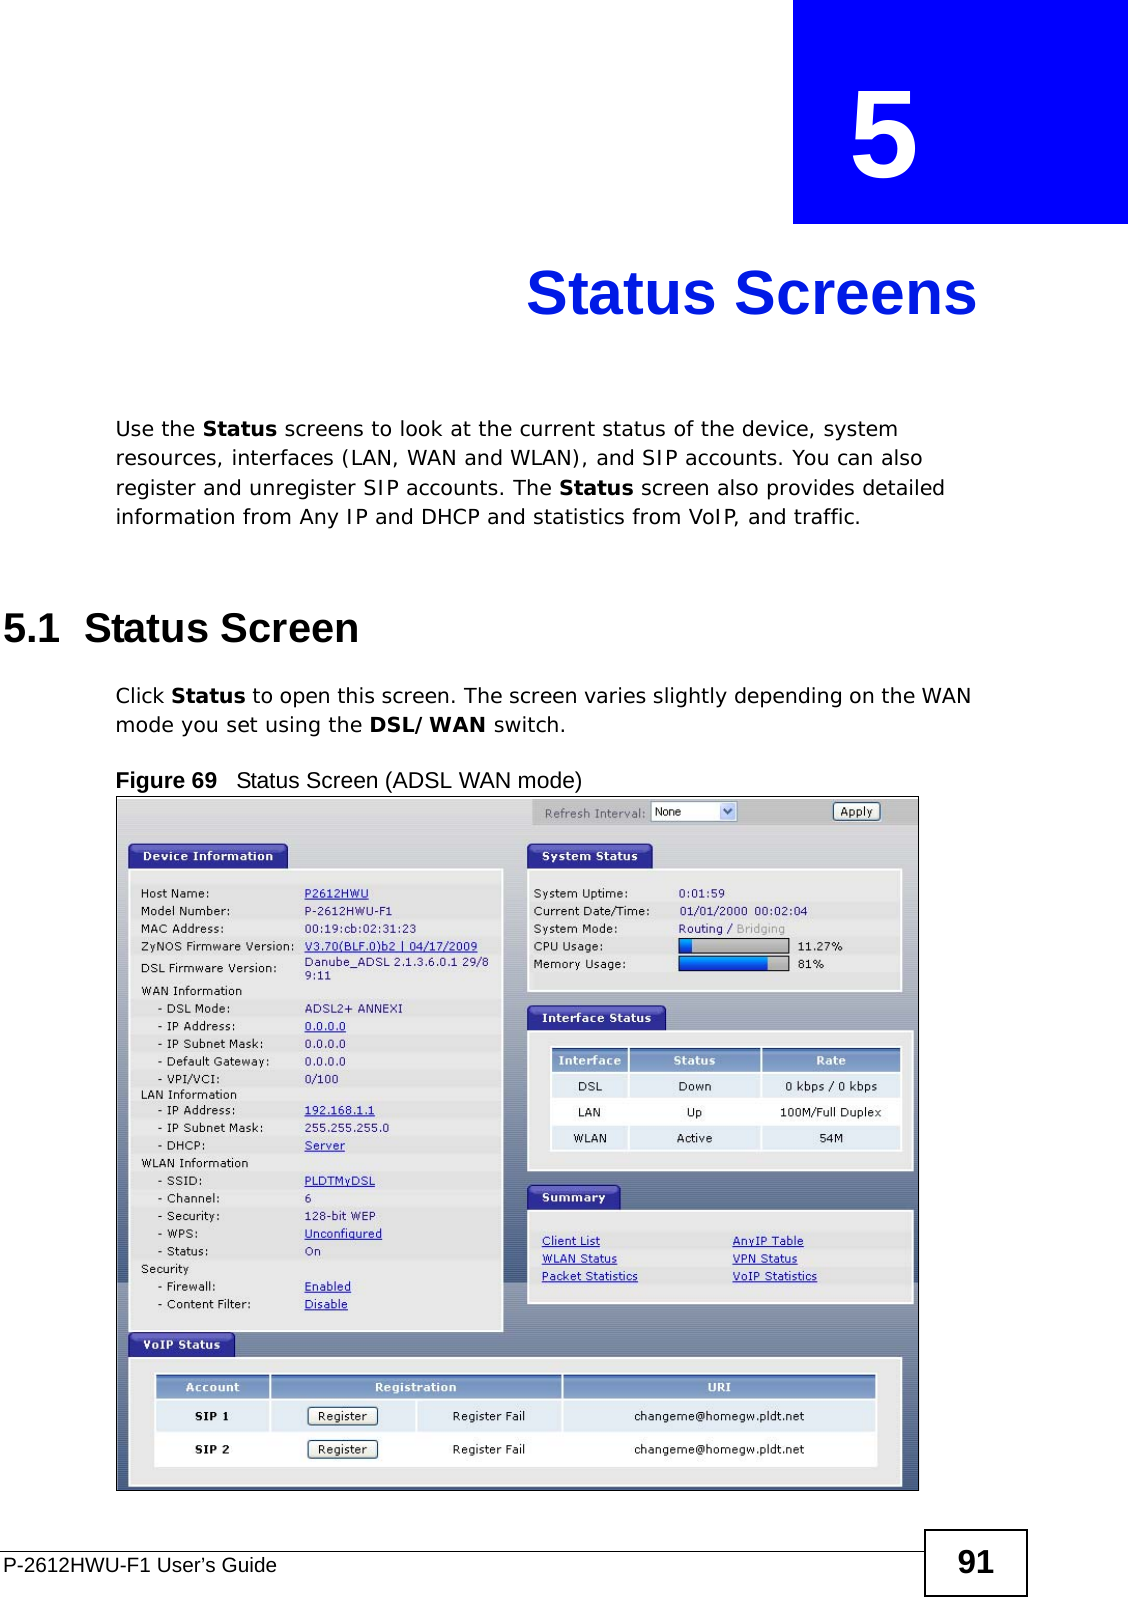 P-2612HWU-F1 User’s Guide 91CHAPTER  5 Status ScreensUse the Status screens to look at the current status of the device, system resources, interfaces (LAN, WAN and WLAN), and SIP accounts. You can also register and unregister SIP accounts. The Status screen also provides detailed information from Any IP and DHCP and statistics from VoIP, and traffic.5.1  Status Screen Click Status to open this screen. The screen varies slightly depending on the WAN mode you set using the DSL/WAN switch.Figure 69   Status Screen (ADSL WAN mode)